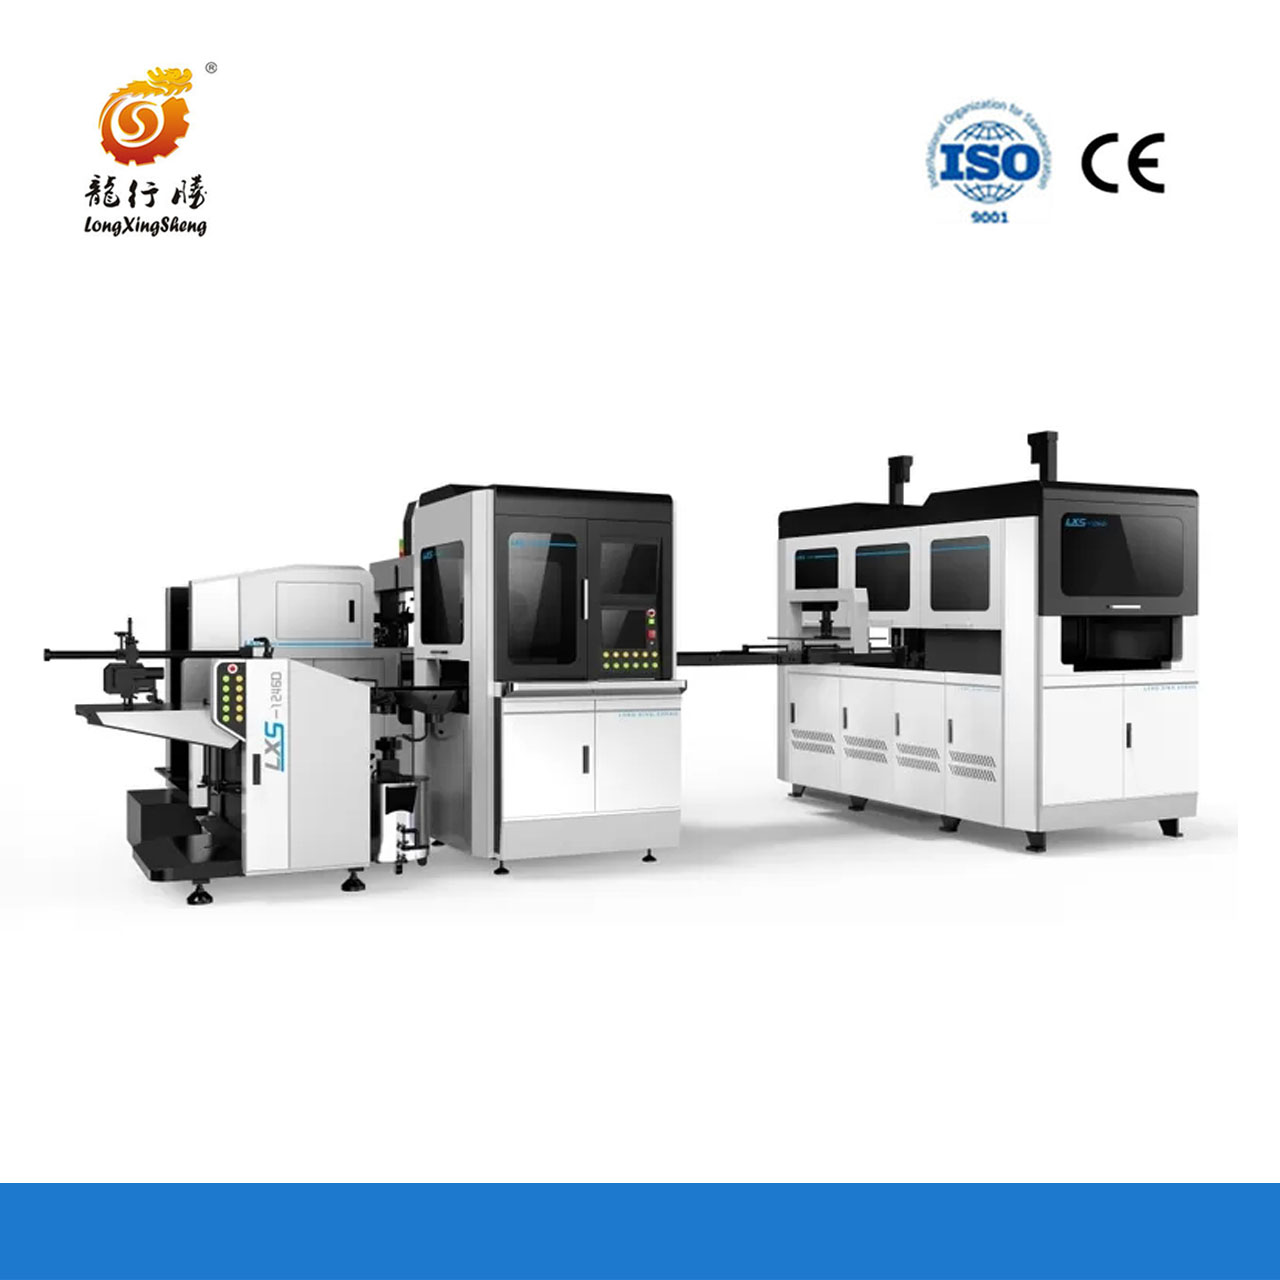  Intelligent Automatic Rigid Box Packaging Machine for Luxury Product